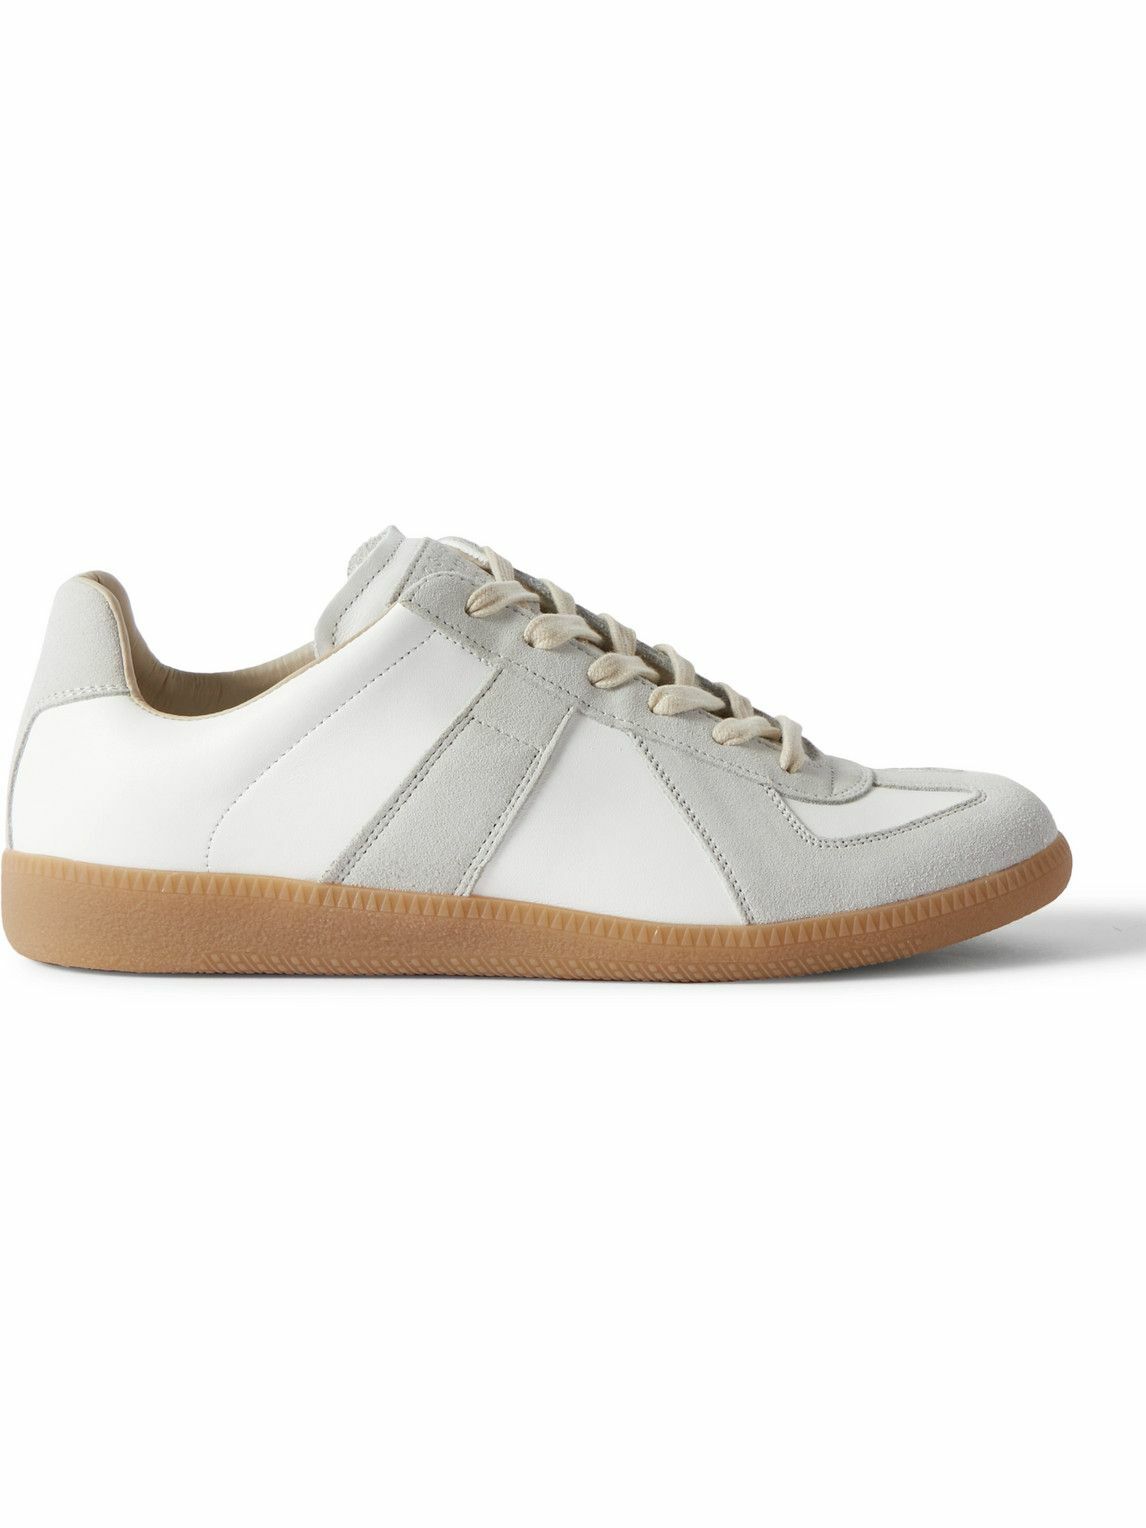 Maison Margiela - Replica Leather and Suede Sneakers - White Maison ...